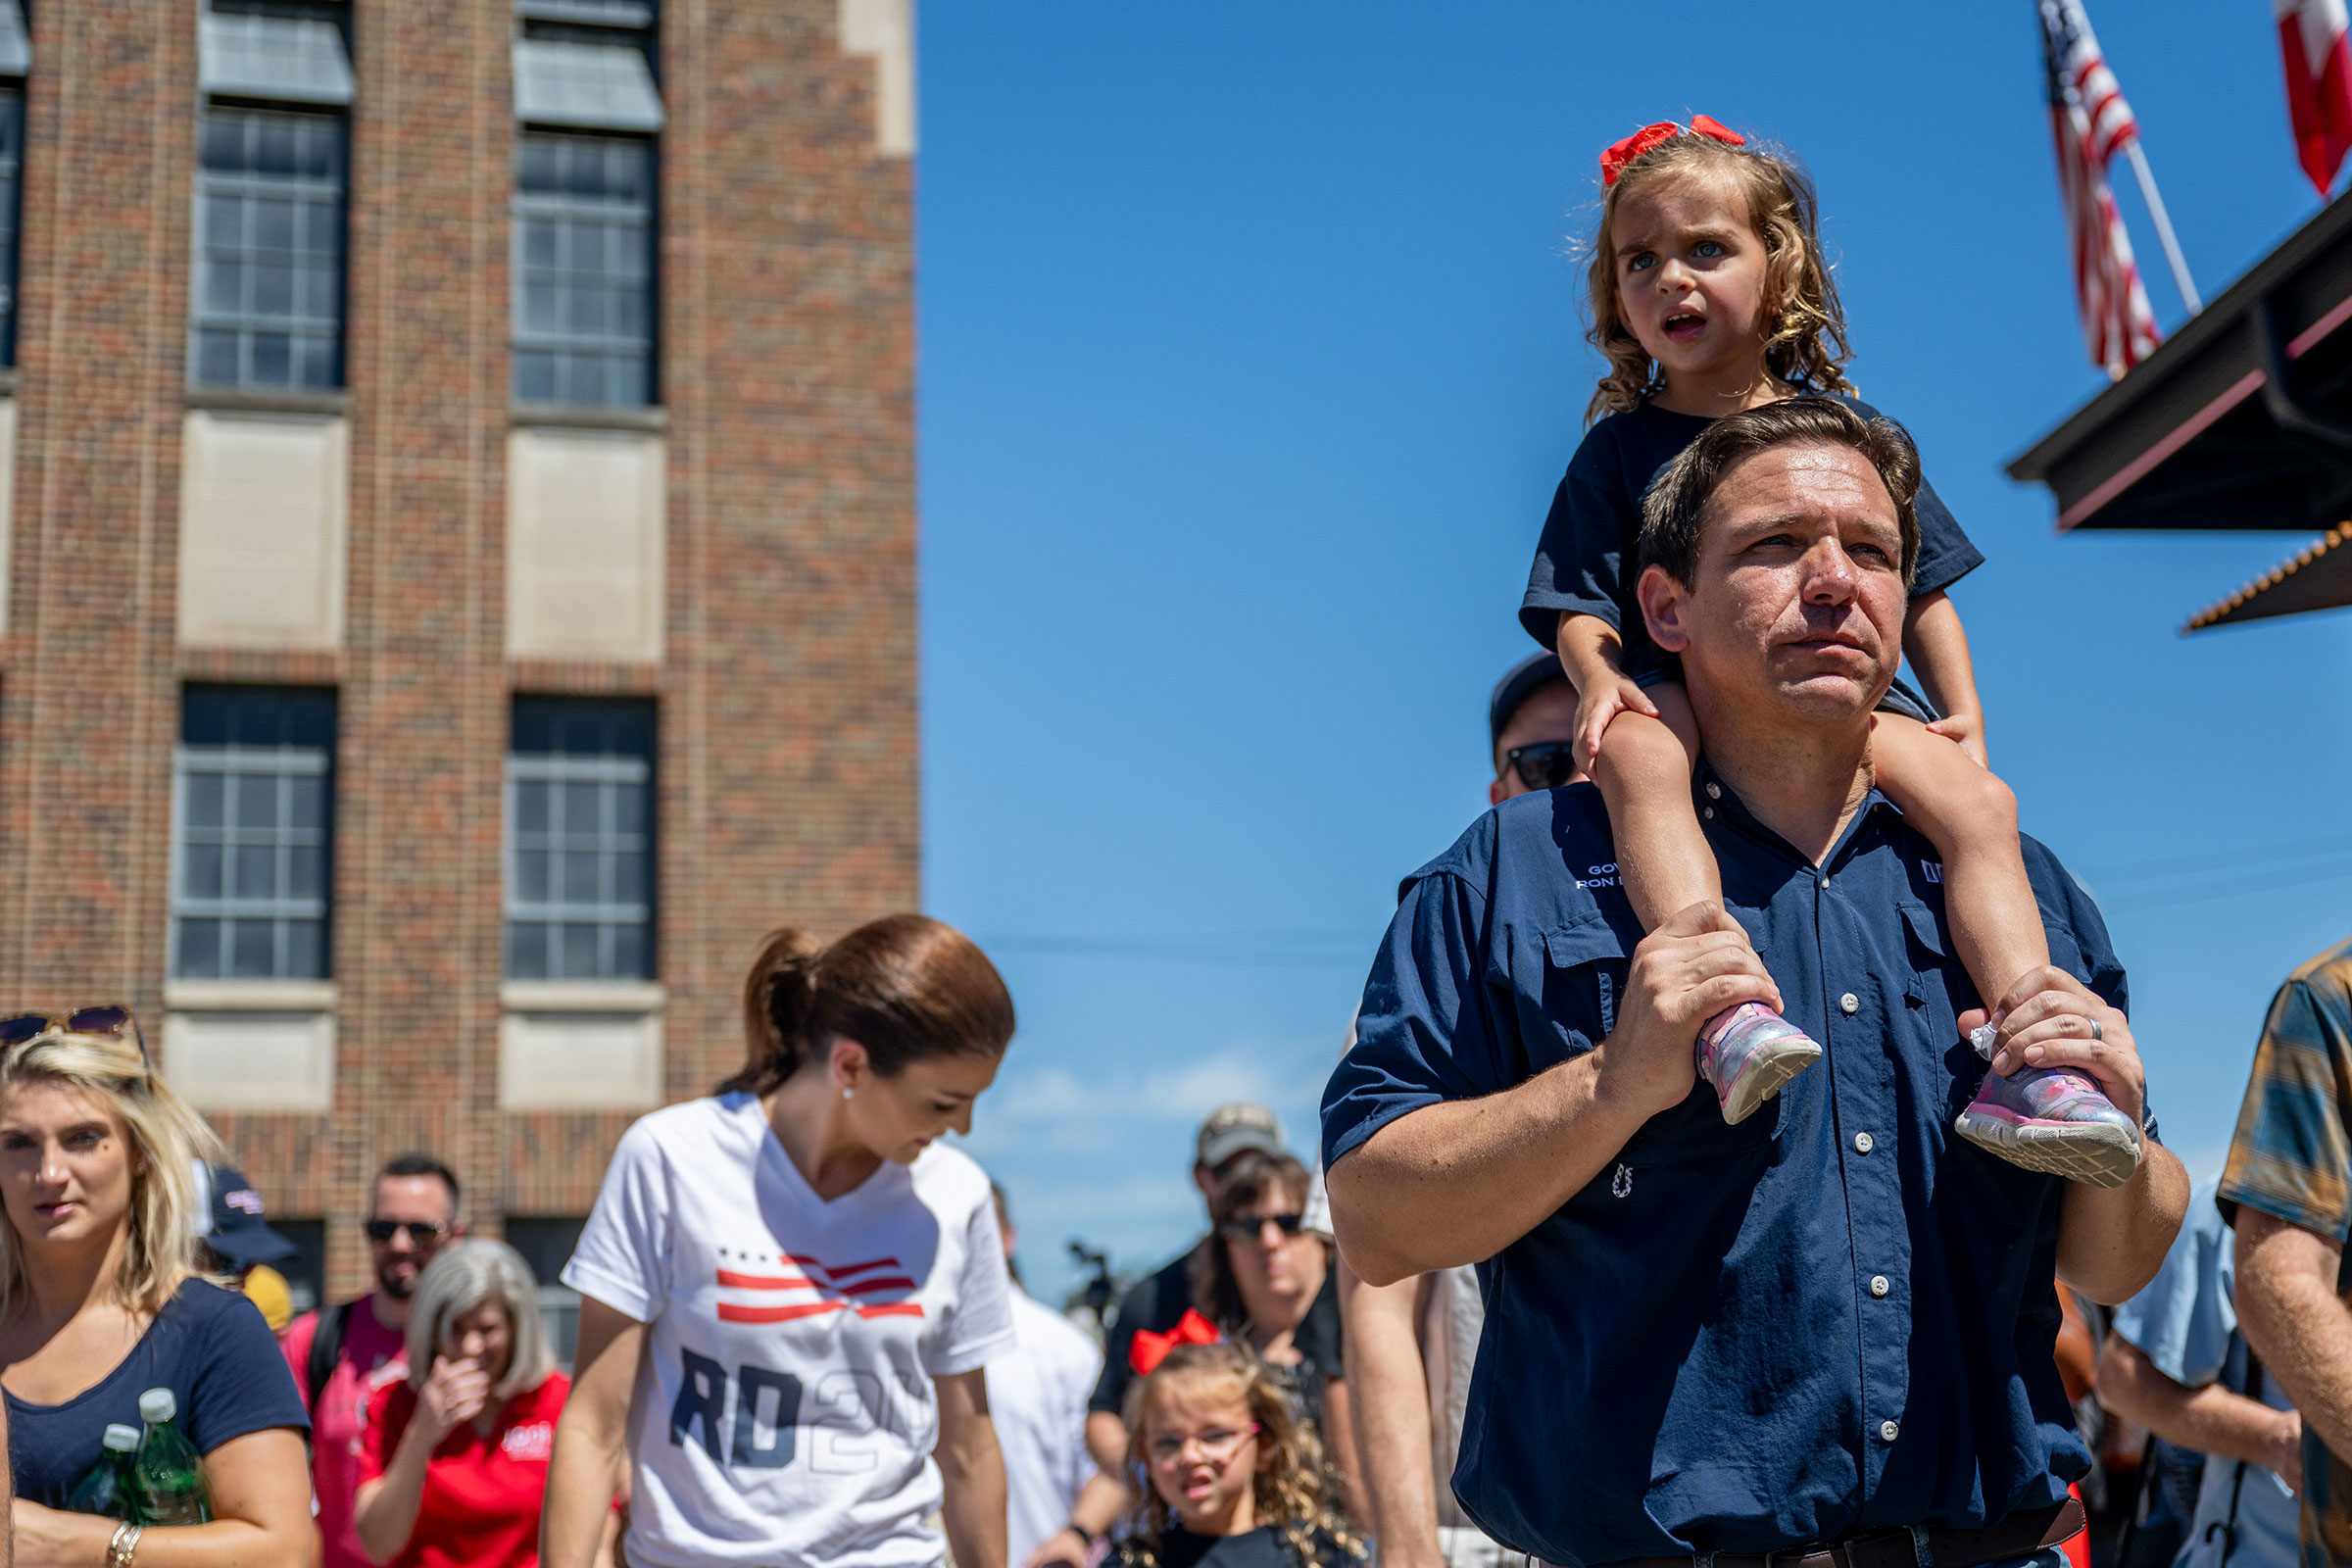 DeSantis walks with his daughter Madison on his shoulders as he ventures through the state fair with the rest of his family behind him